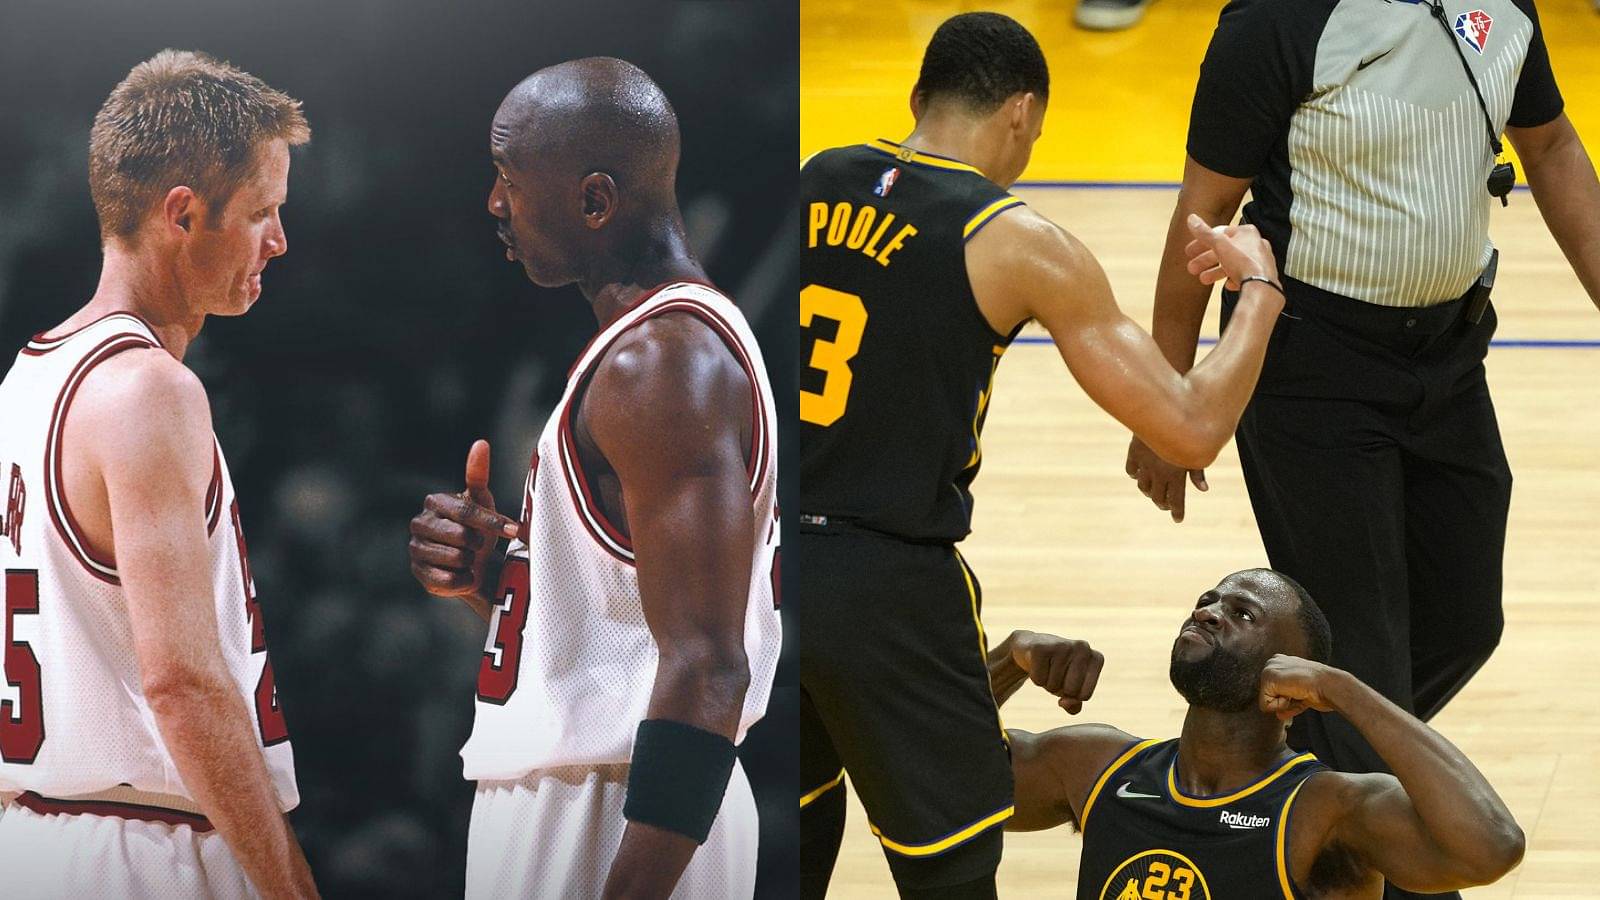 “You Can Criticize Everyone, Except For Michael Jordan”: Colin Cowherd Questions ‘His Airness’ on the Steve Kerr Punch & Charles Barkley Relationship